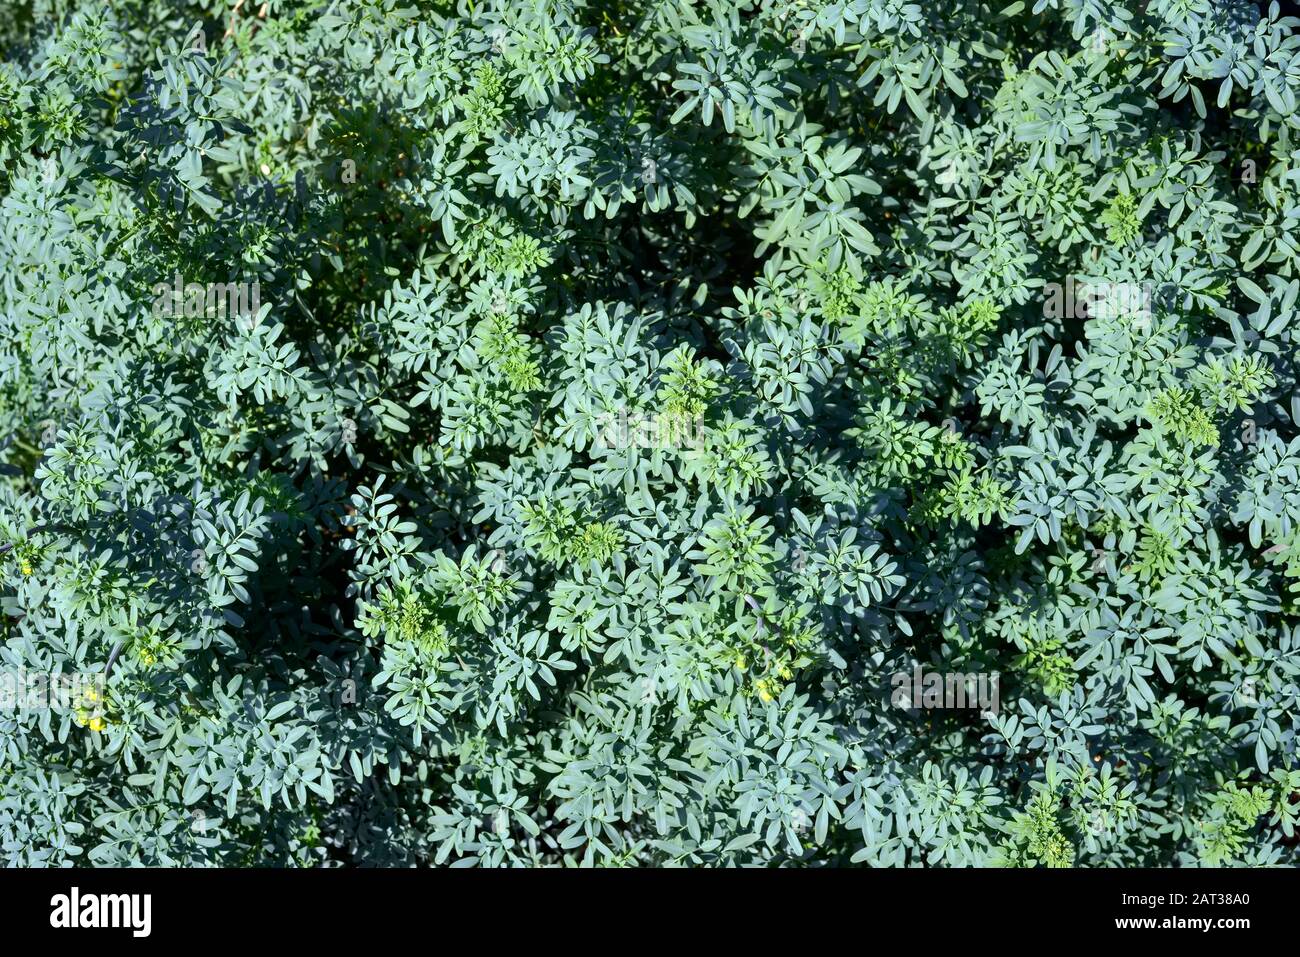 Fresh large rue herb ( Ruta Graveolens )  plant outdoors, teal foliage.Plant for medicinal, culinary and esoteric use. Stock Photo